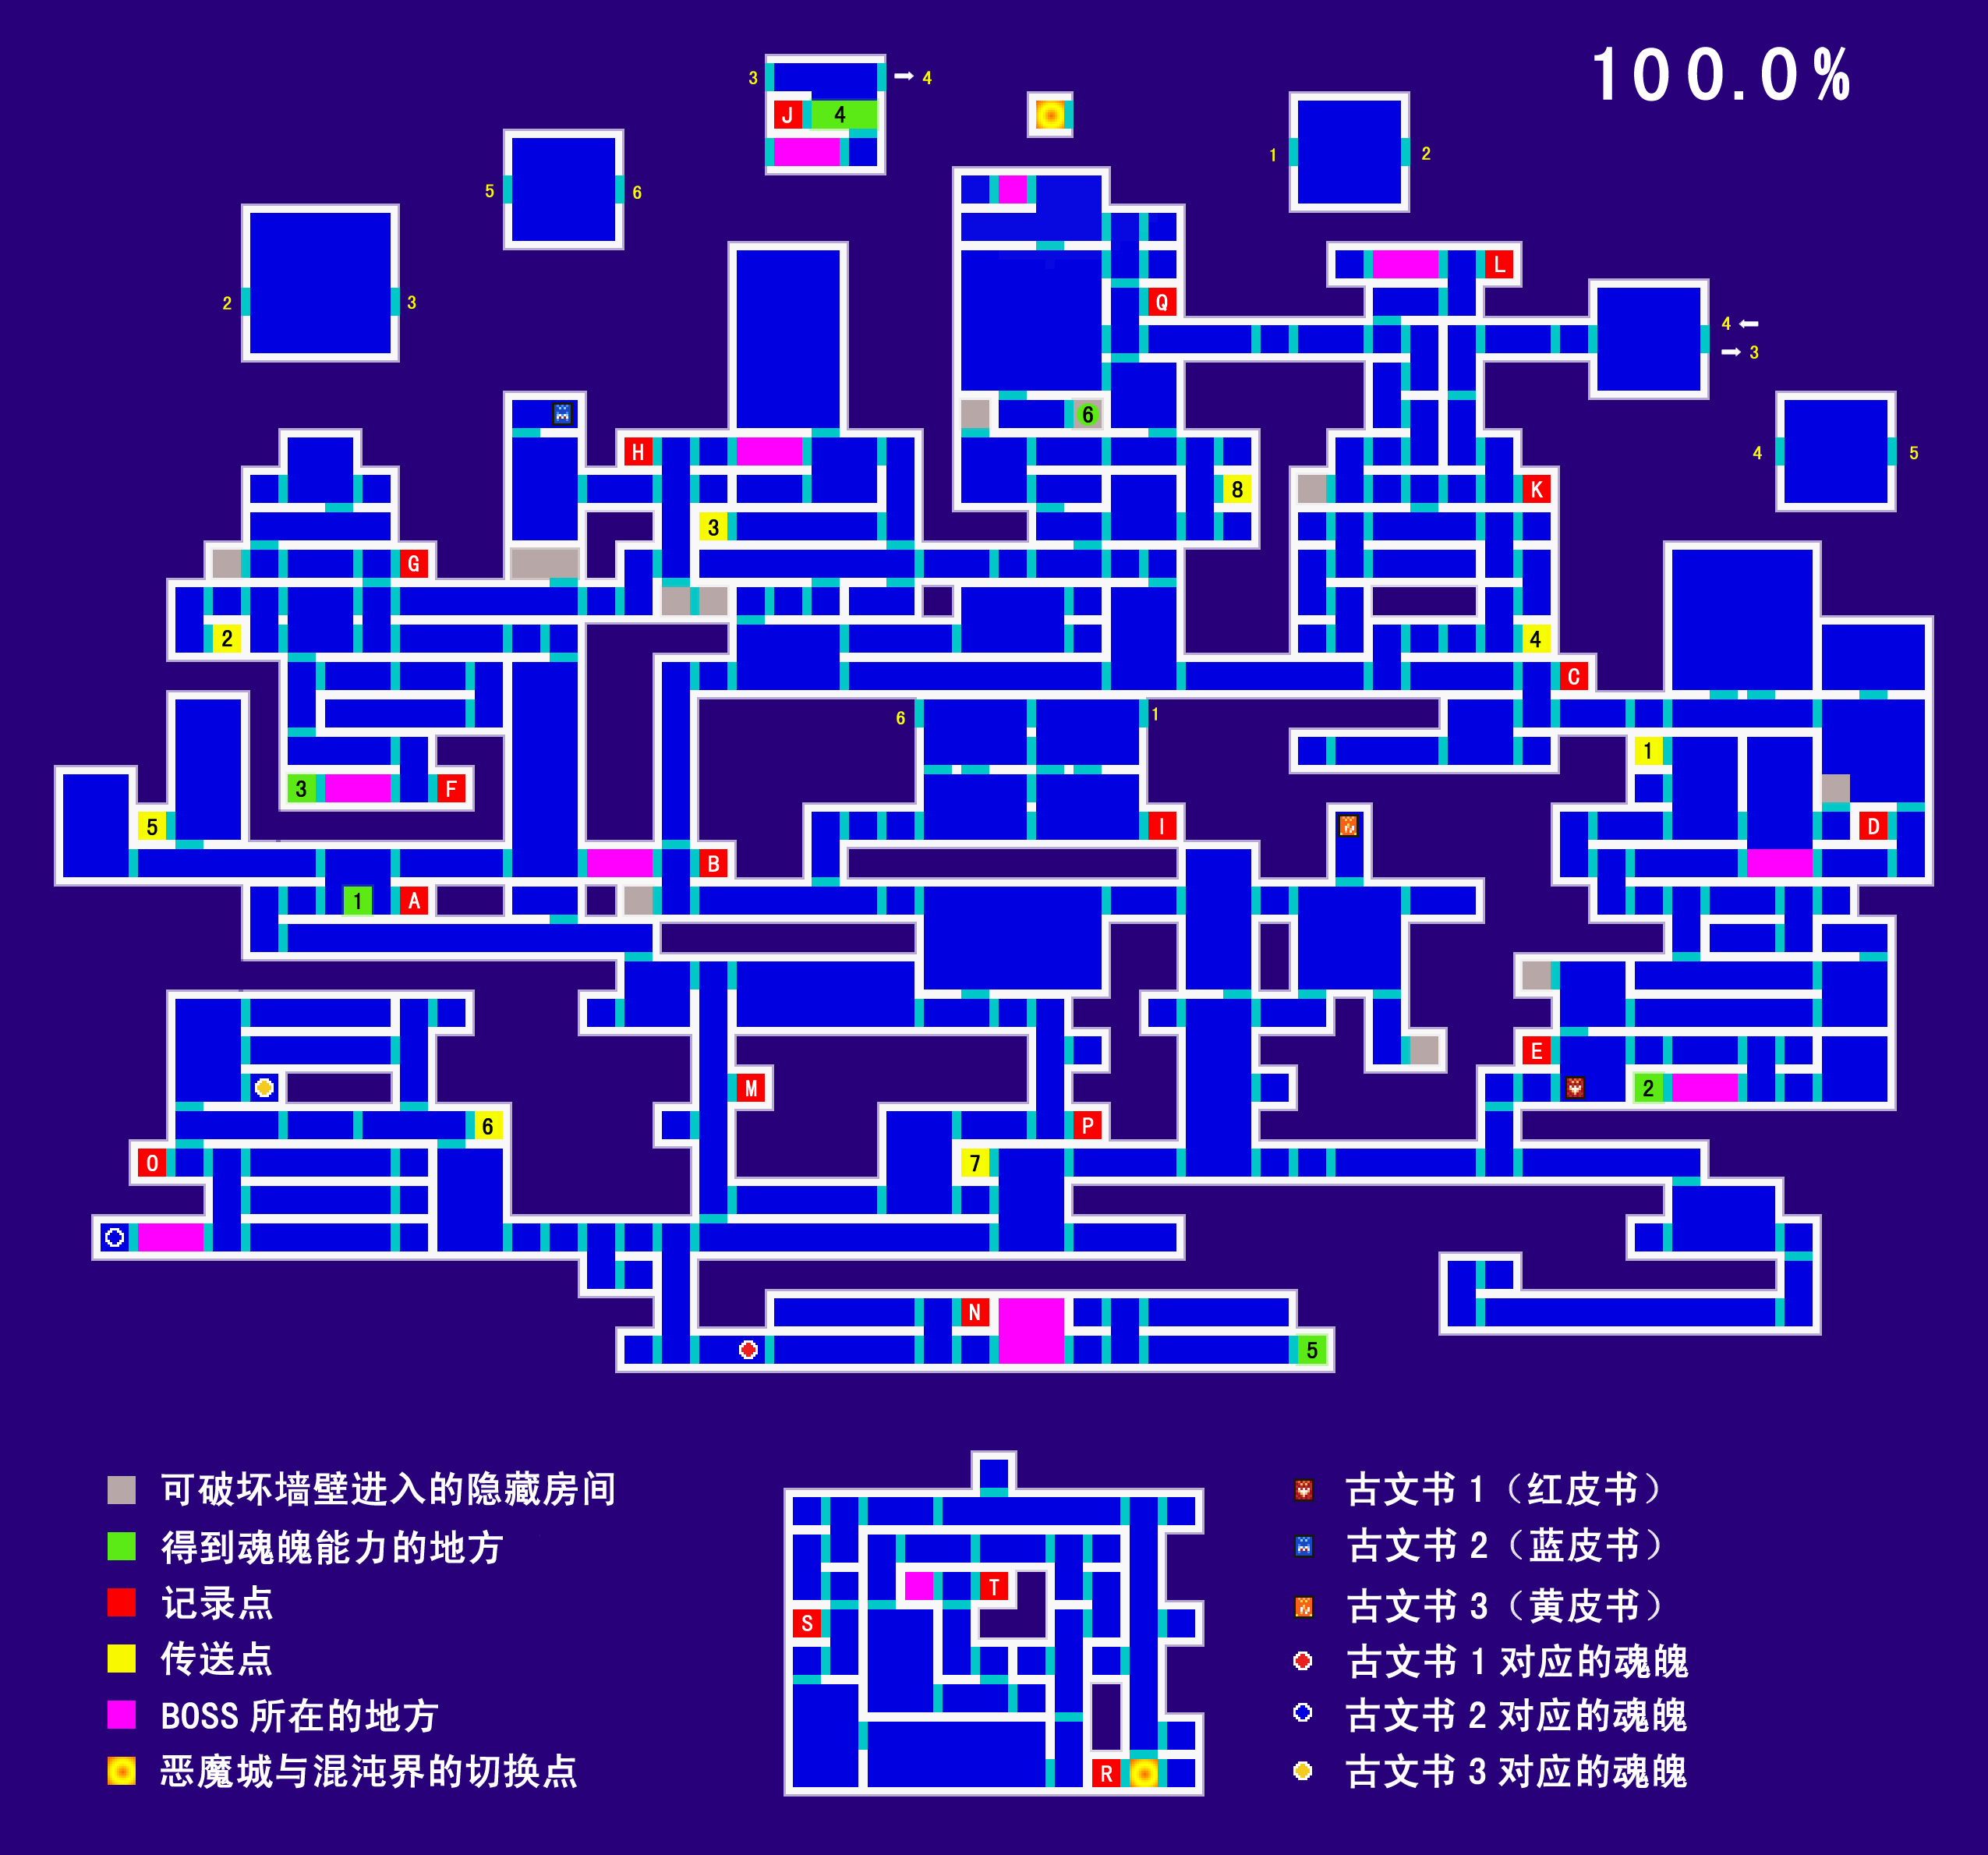 Castlevania Advance Collection List of All Collectible Items + Map Location Guide - In Game Map (CN.ver) - E21F290